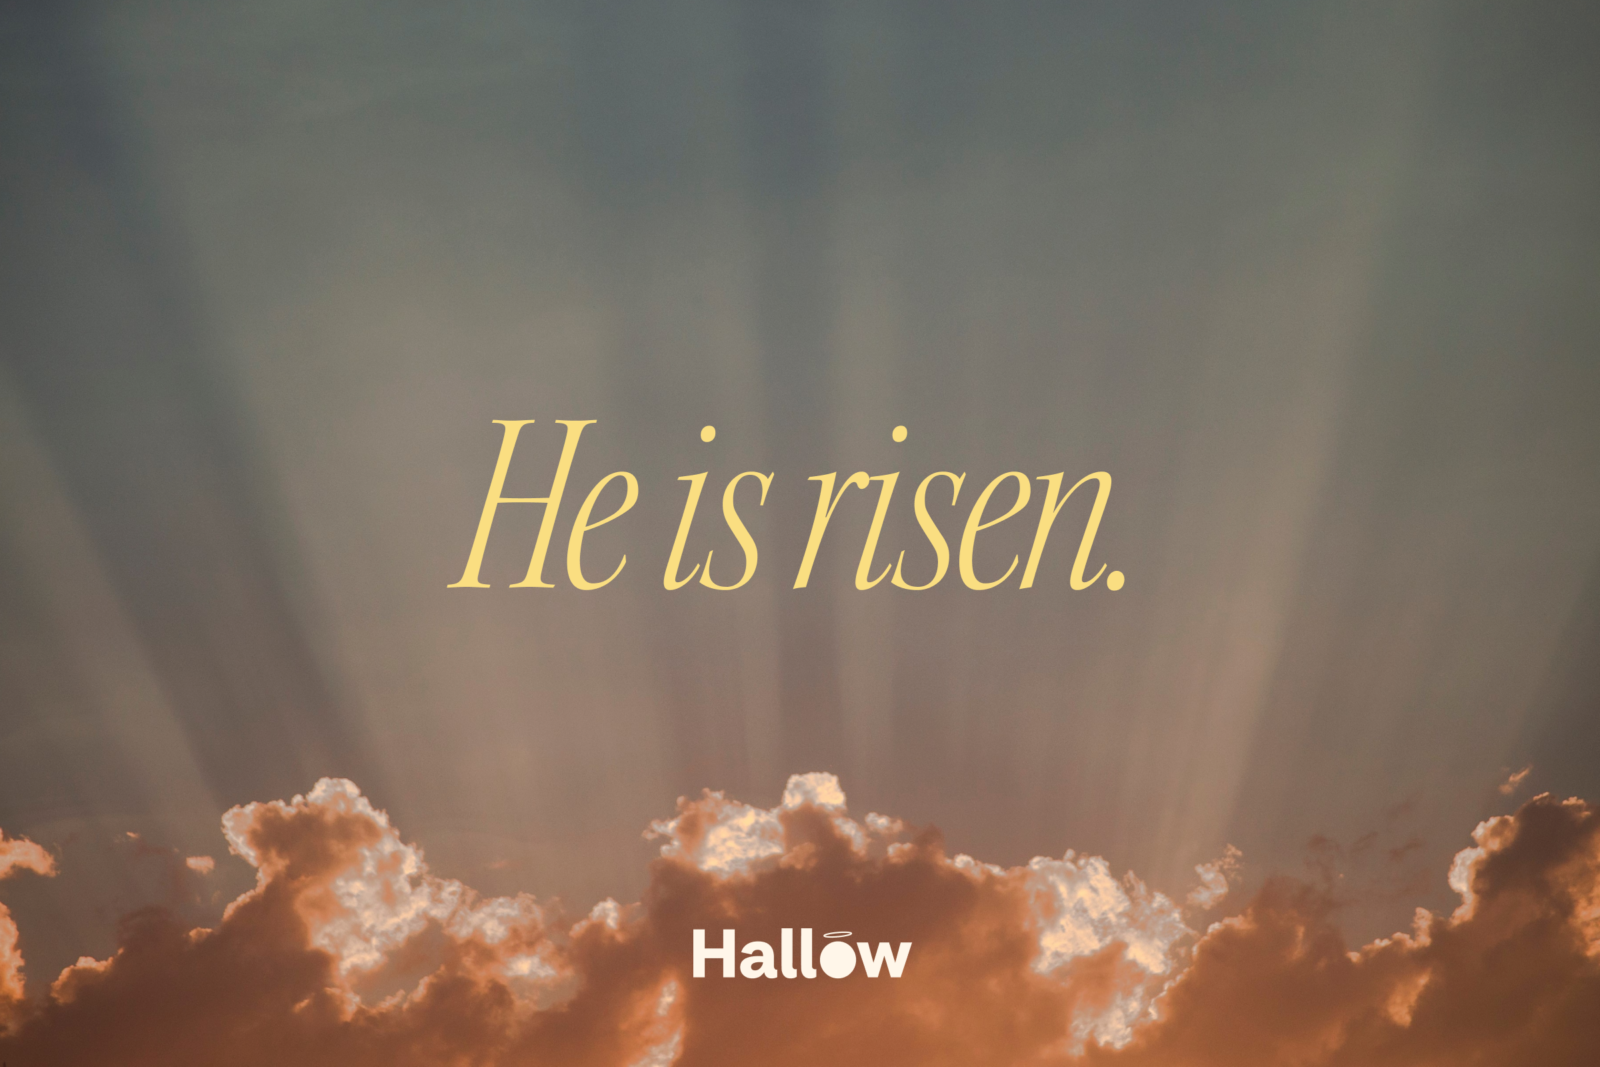 Happy Easter Images Free Religious/Christian Easter Images for 2023